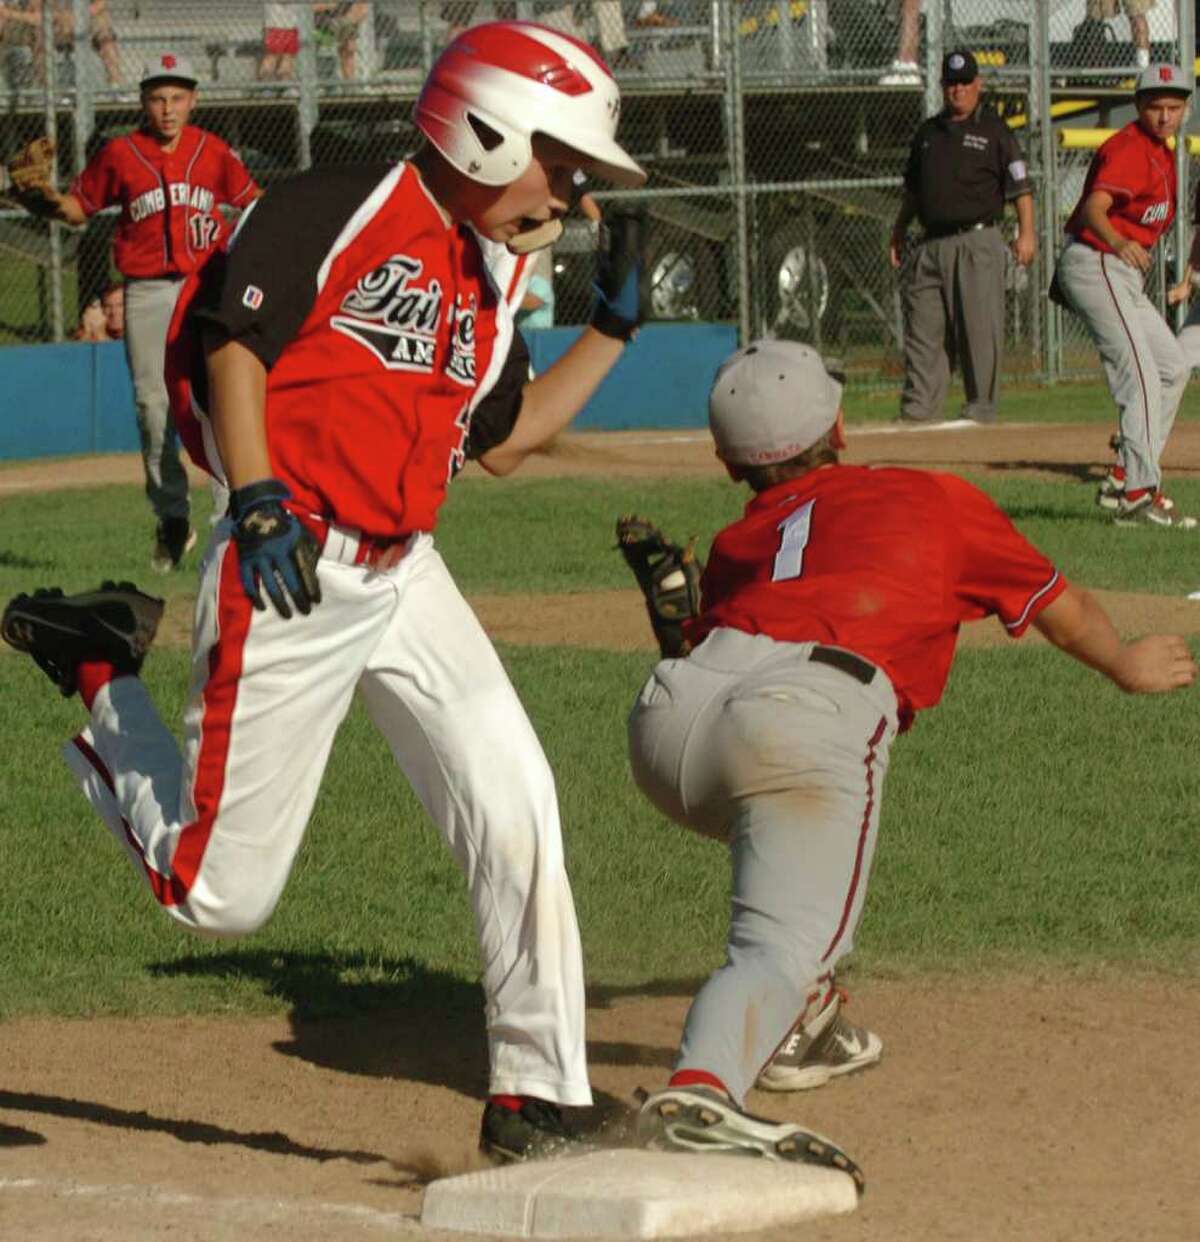 Fairfield American's #3 Phillip Vlandis is tagged out at first by Rhode Island's #1 Colin Cannata, ending the game, at the Little League Baseball Eastern Regional Semi-fiinal game in Bristol, Conn. on Thursday August 11, 2011. Fairfield American was beat 8-7.